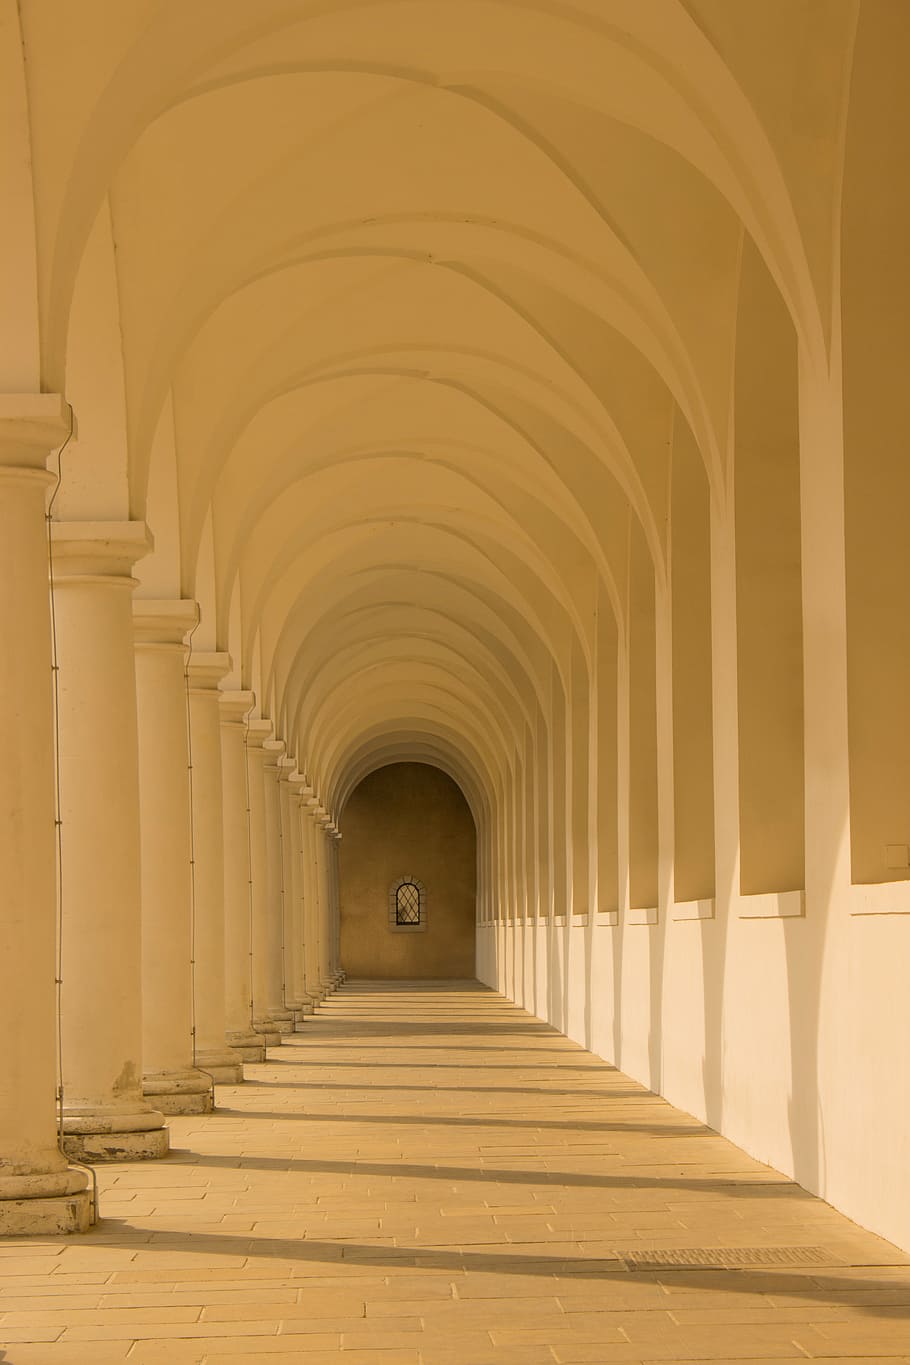 arches, gang, arch, architecture, archway, building, columnar, arcade, old, round arch